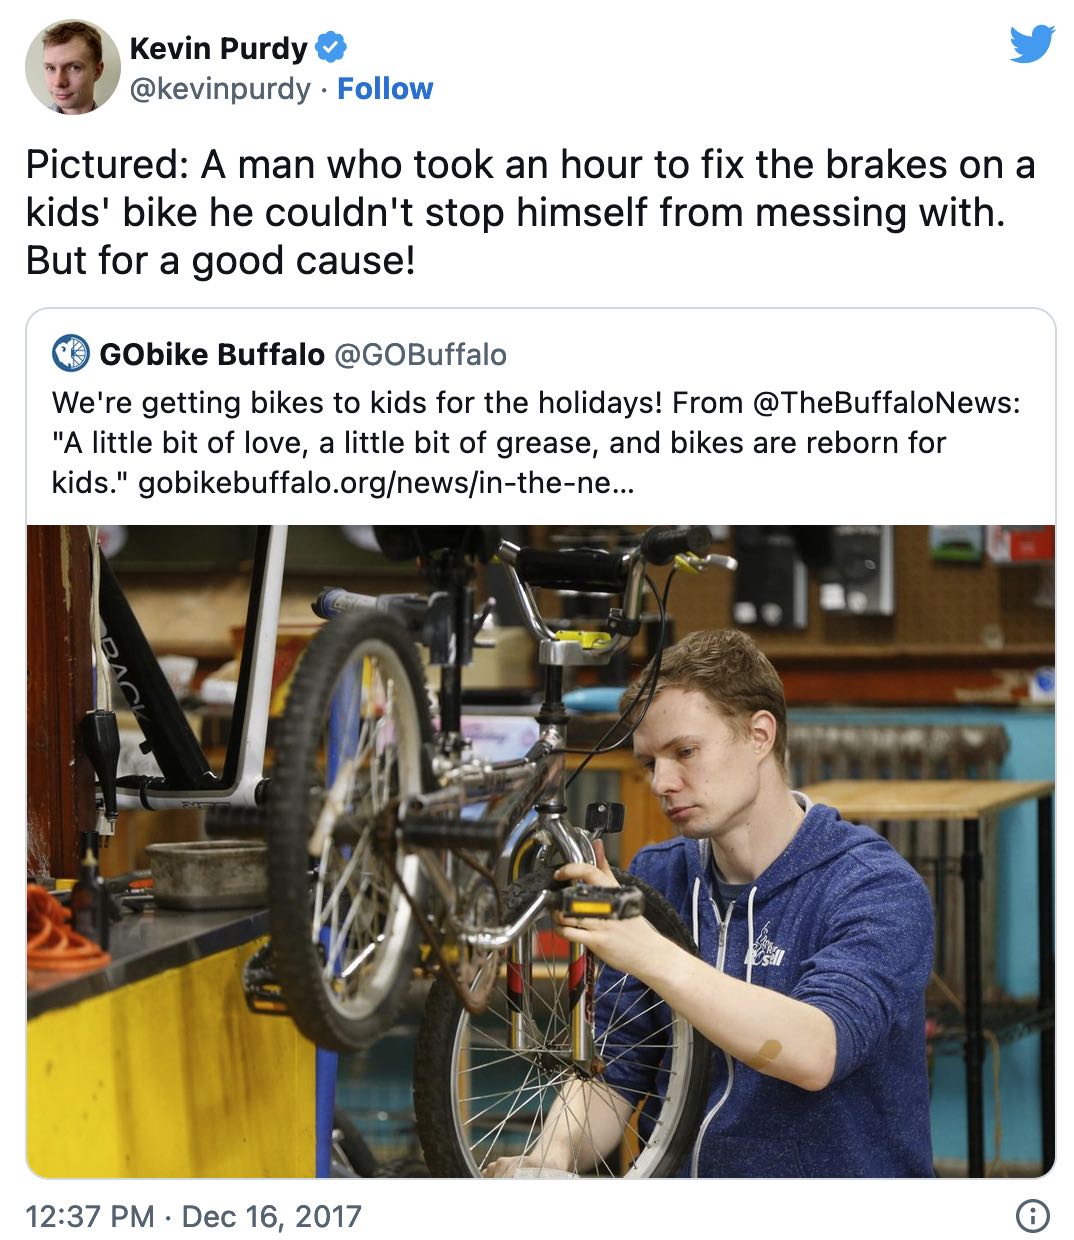 Pictured: A man who took an hour to fix the brakes on a kids' bike he couldn't stop himself from messing with. But for a good cause!